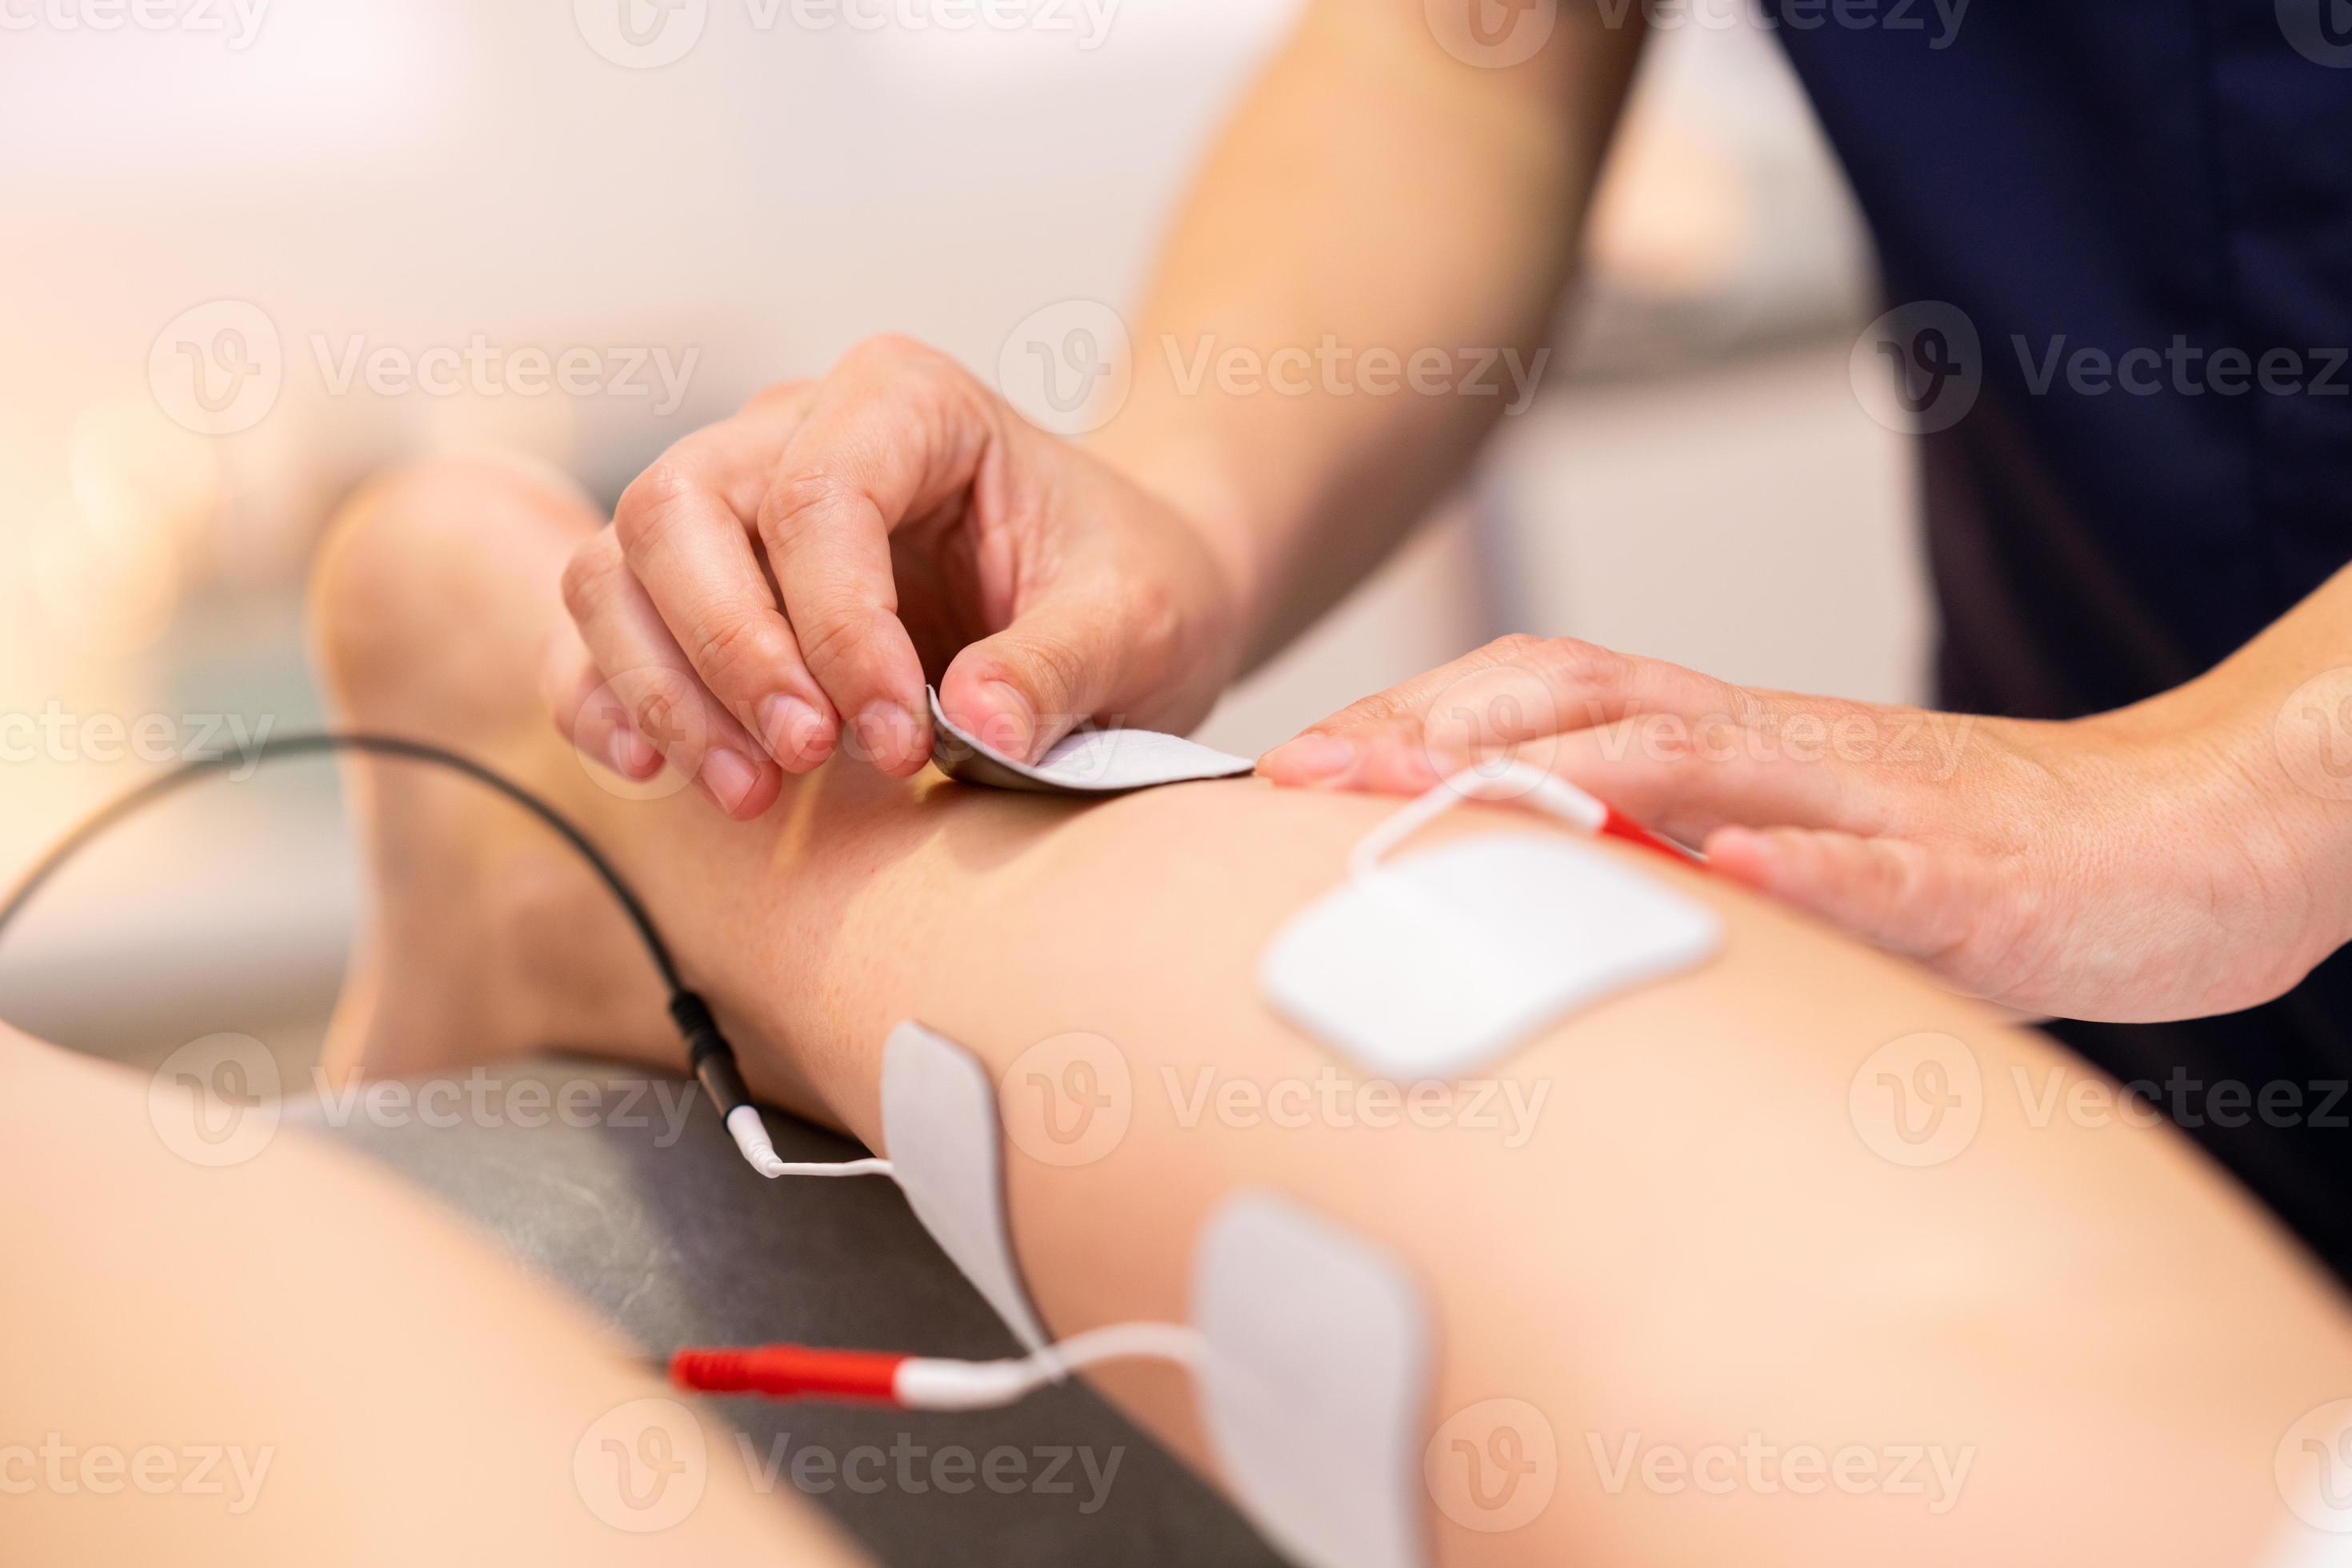 https://static.vecteezy.com/system/resources/previews/004/674/803/large_2x/electro-stimulation-in-physical-therapy-to-a-young-woman-photo.jpg